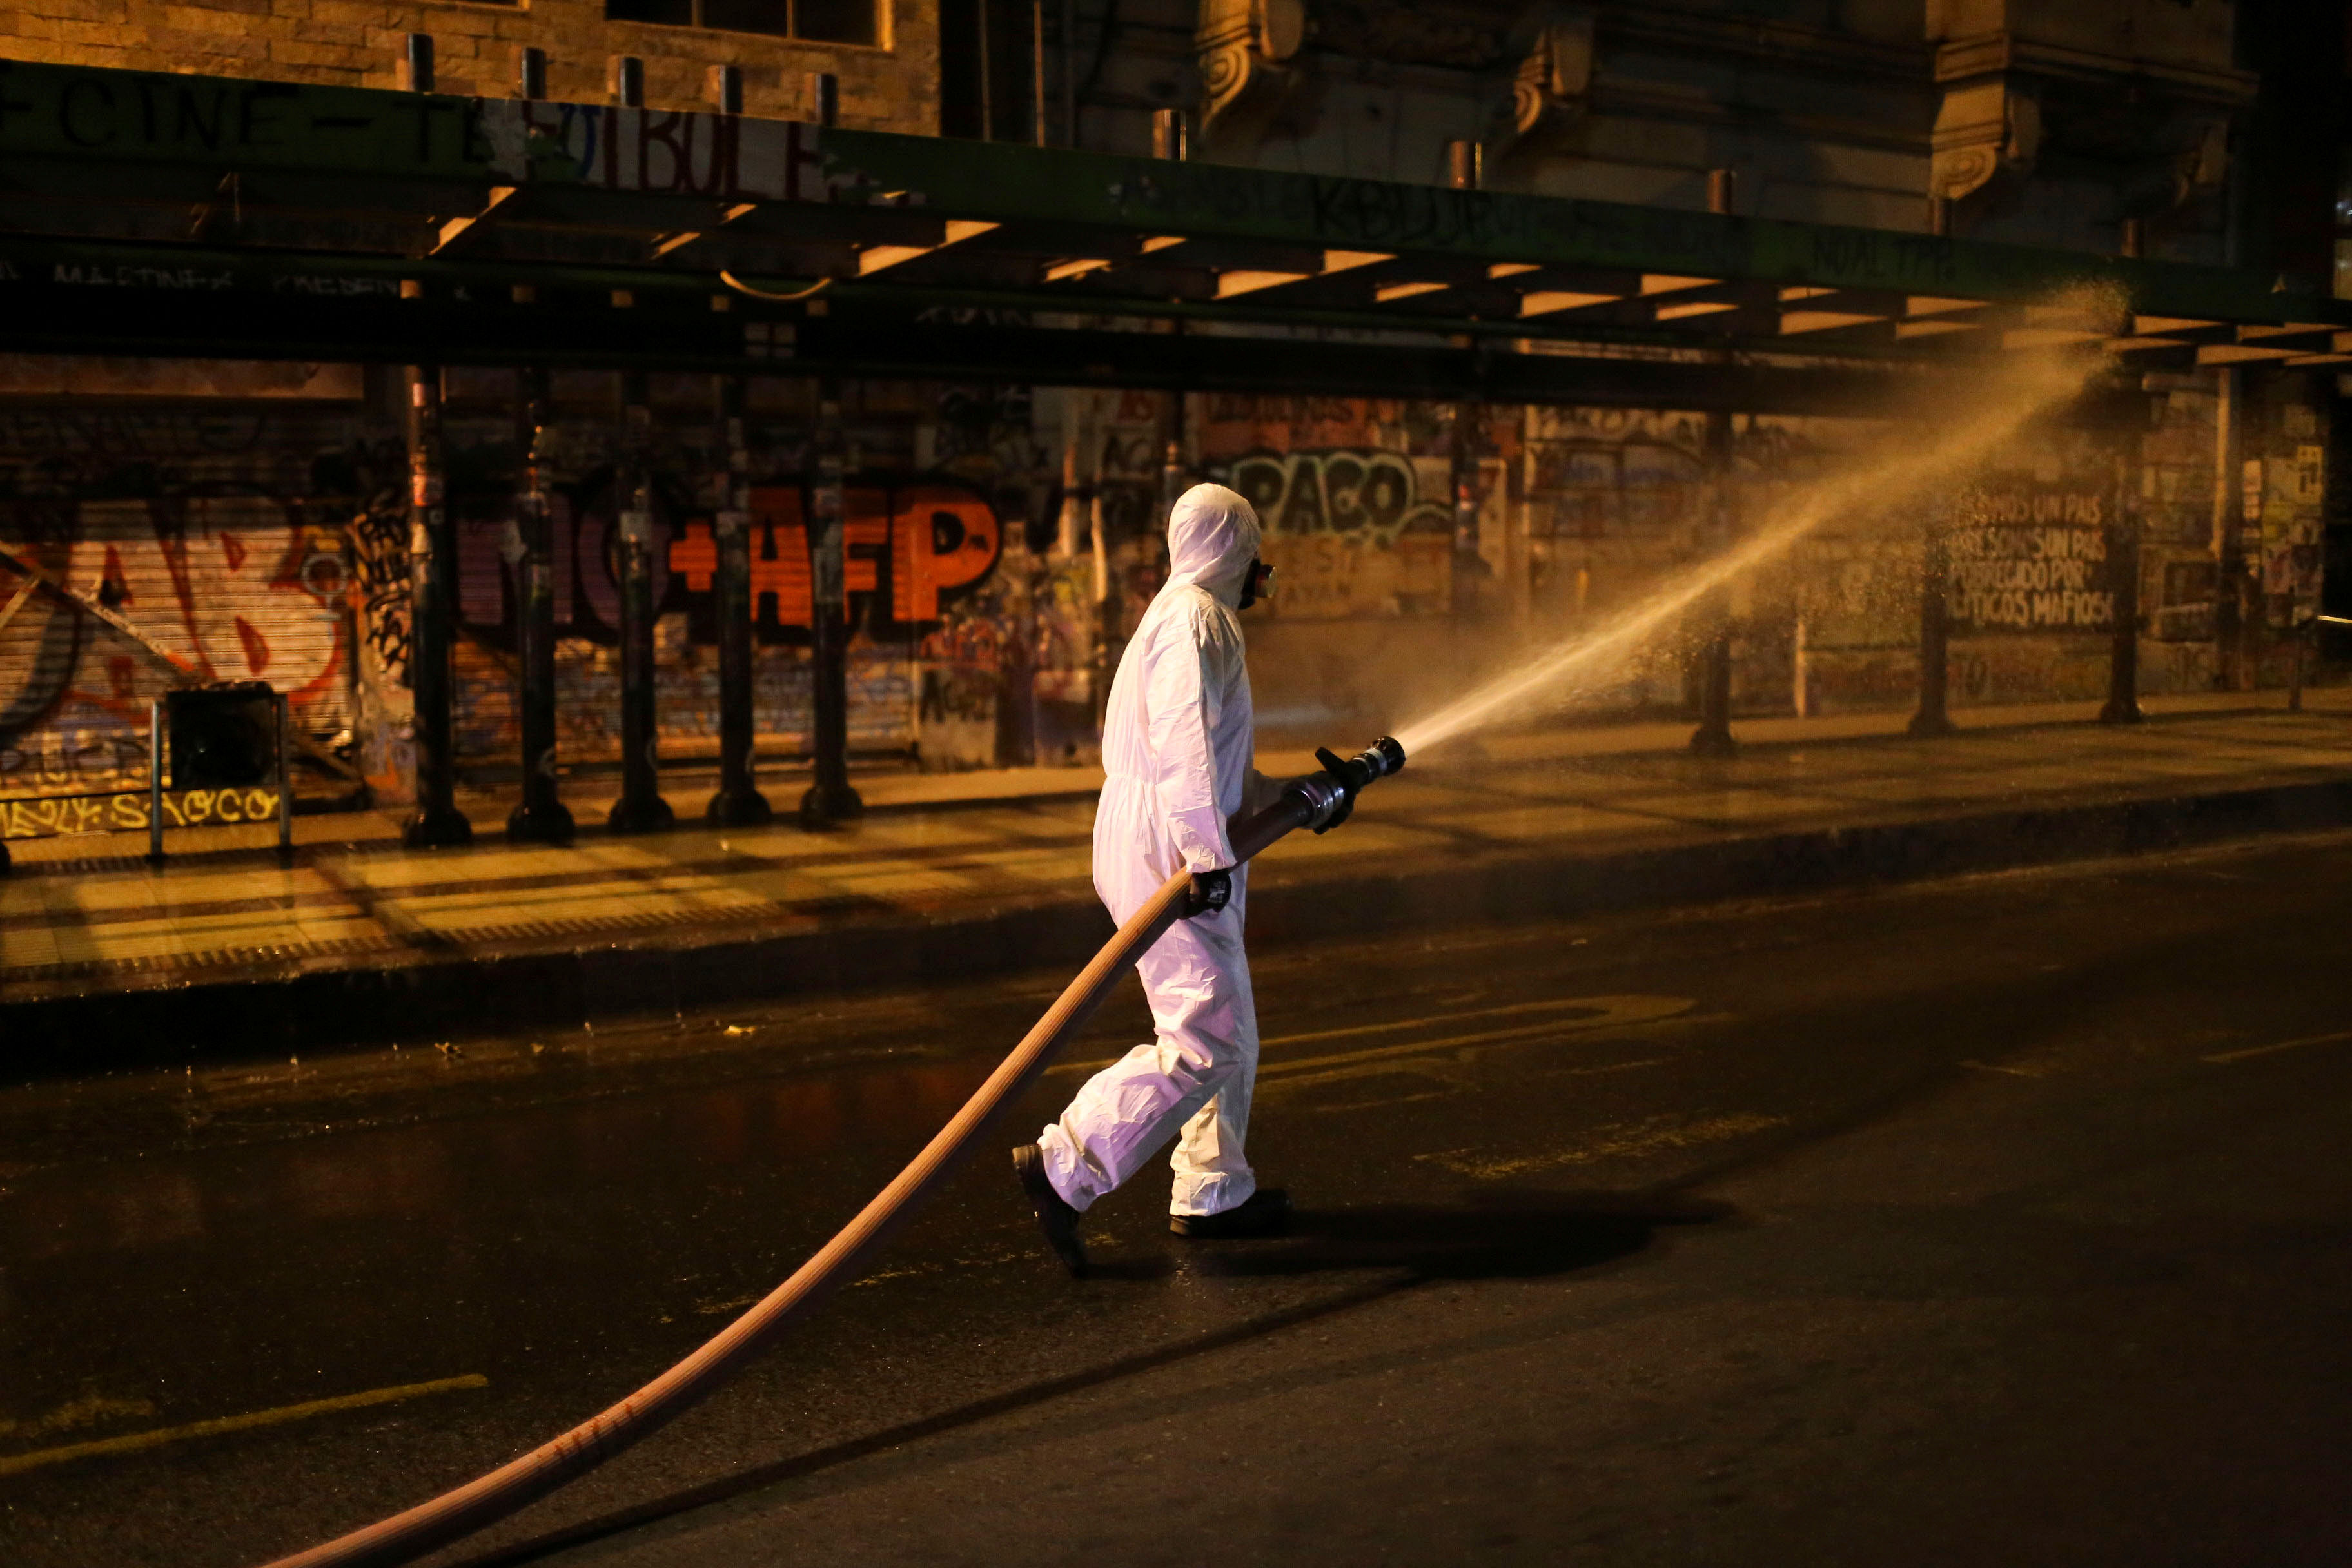 Local workers clean the streets as a precautionary measure, amid the coronavirus disease. (Credit: Reuters)